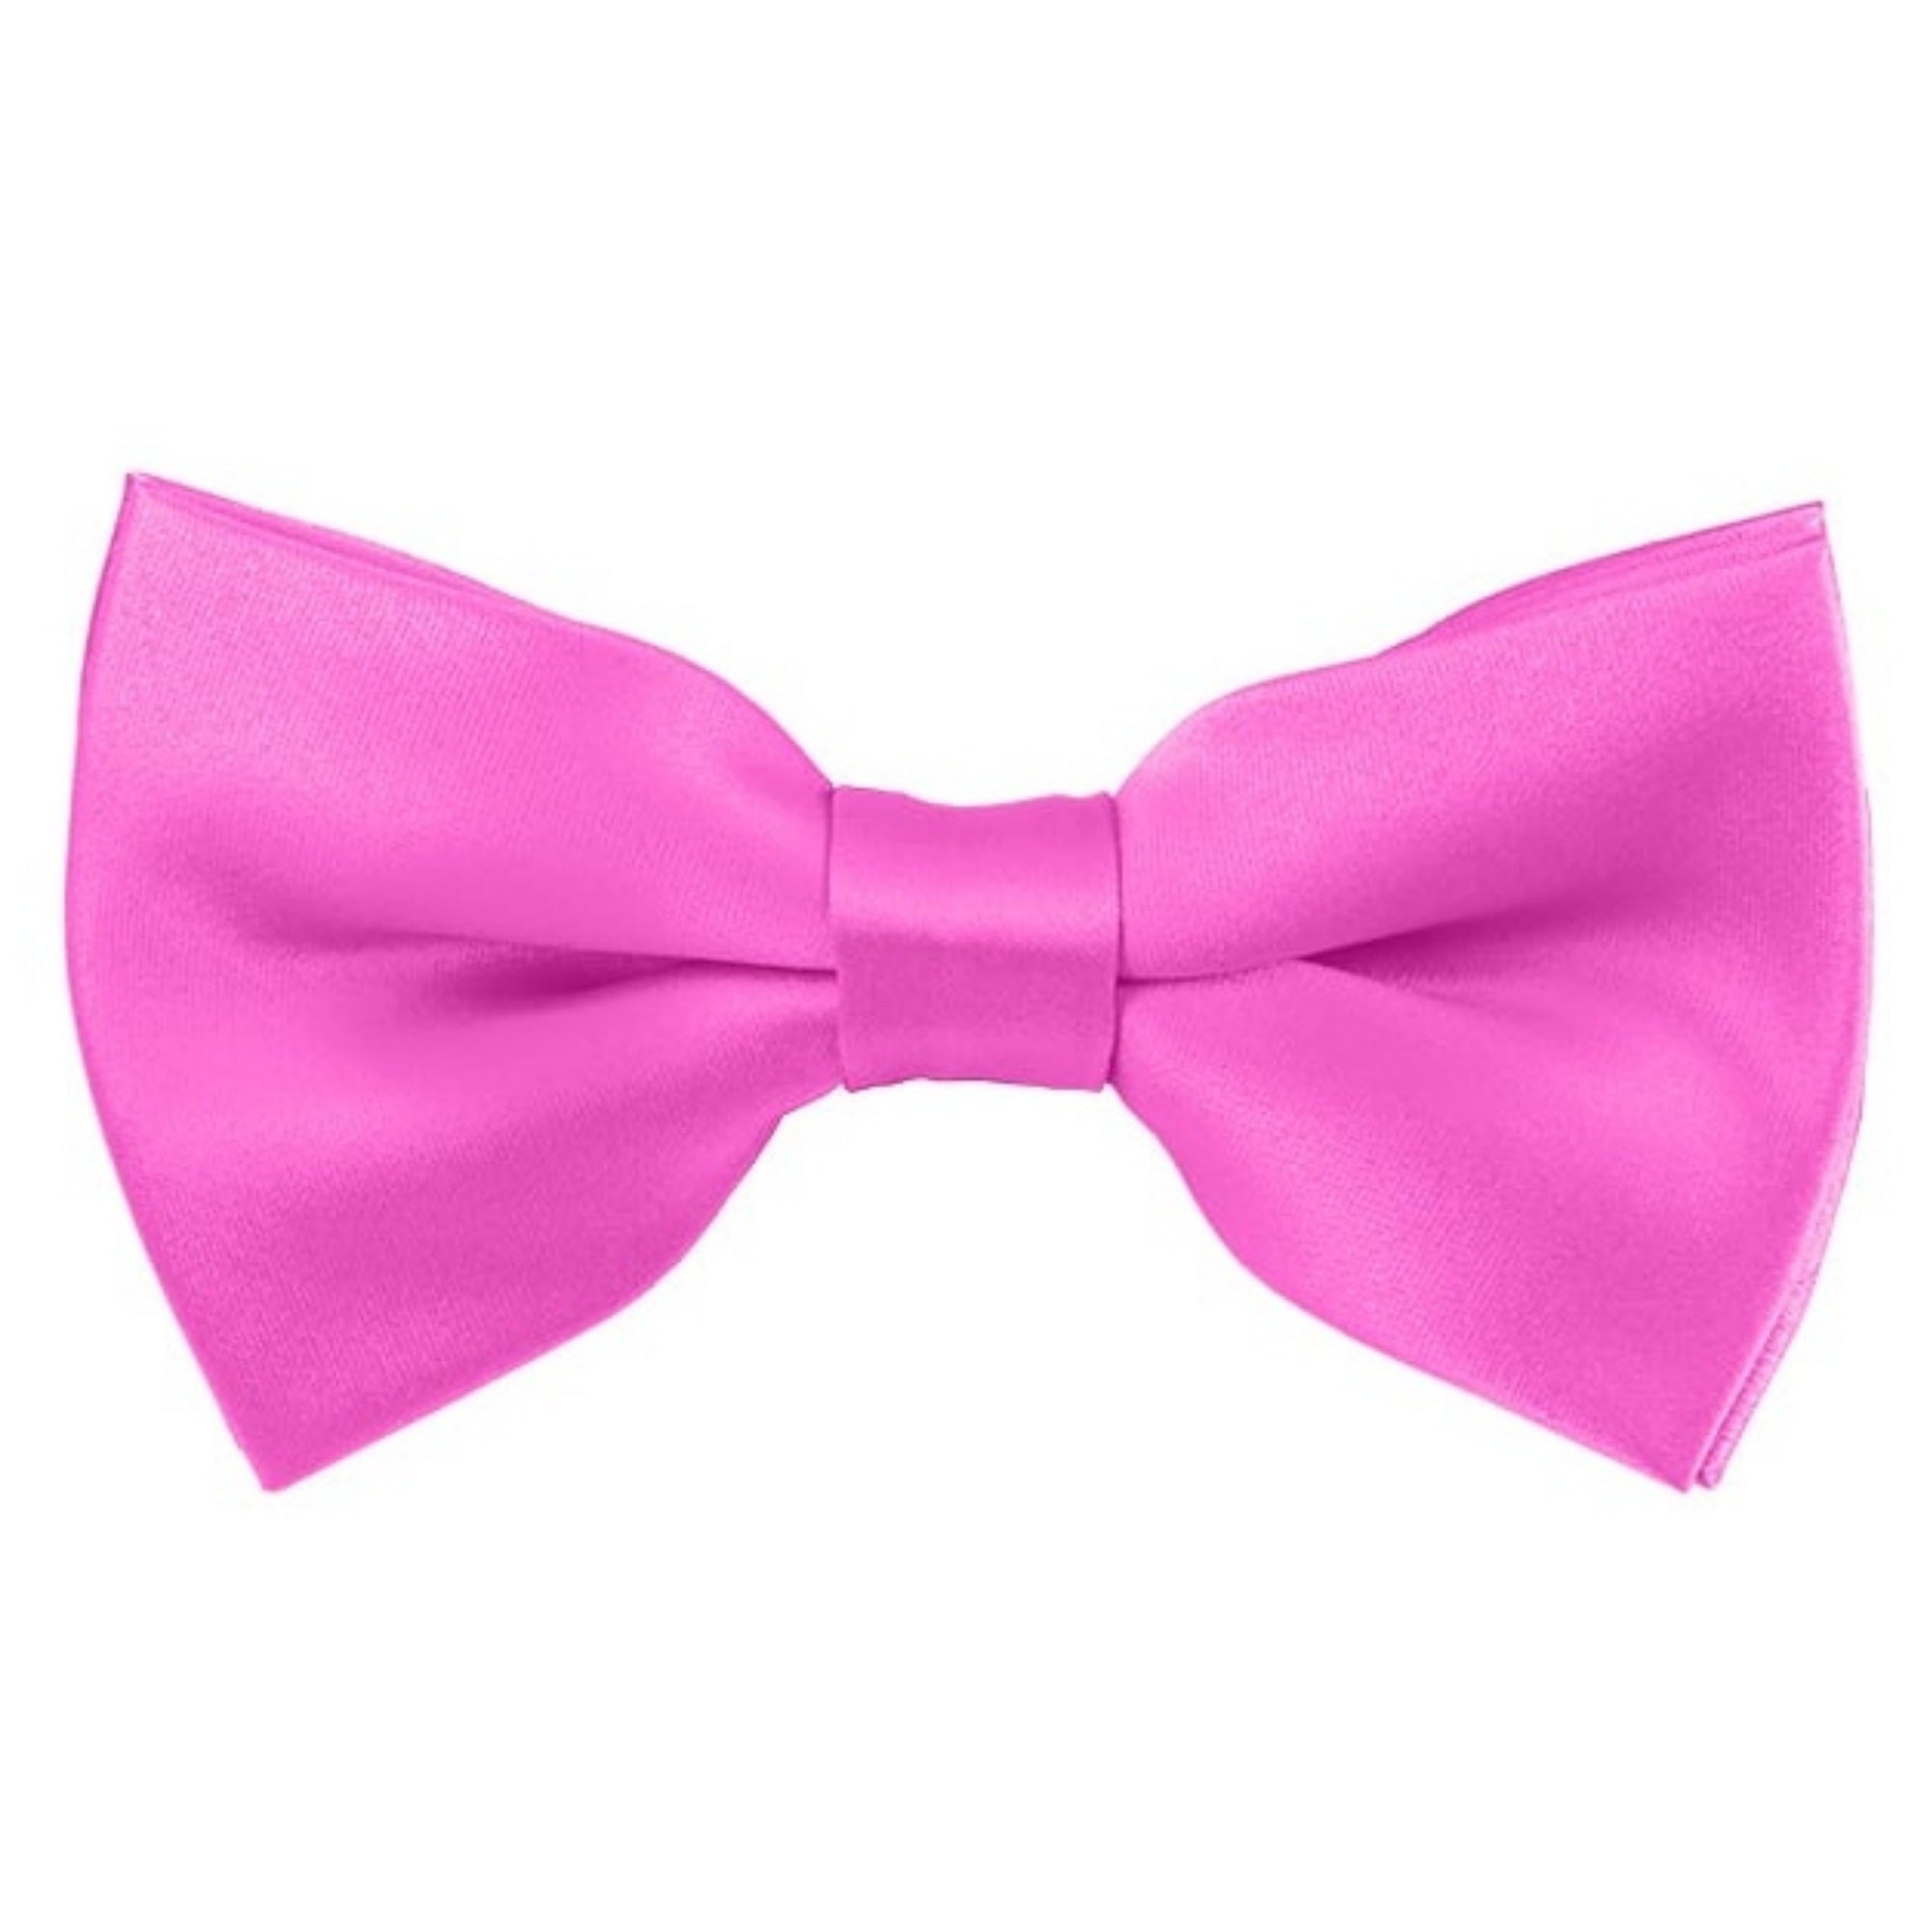 TheDapperTie Men's Solid Color 2.5 W And 4.5 L Inch Pre-Tied adjustable Bow Ties Men's Solid Color Bow Tie TheDapperTie Hot Pink  